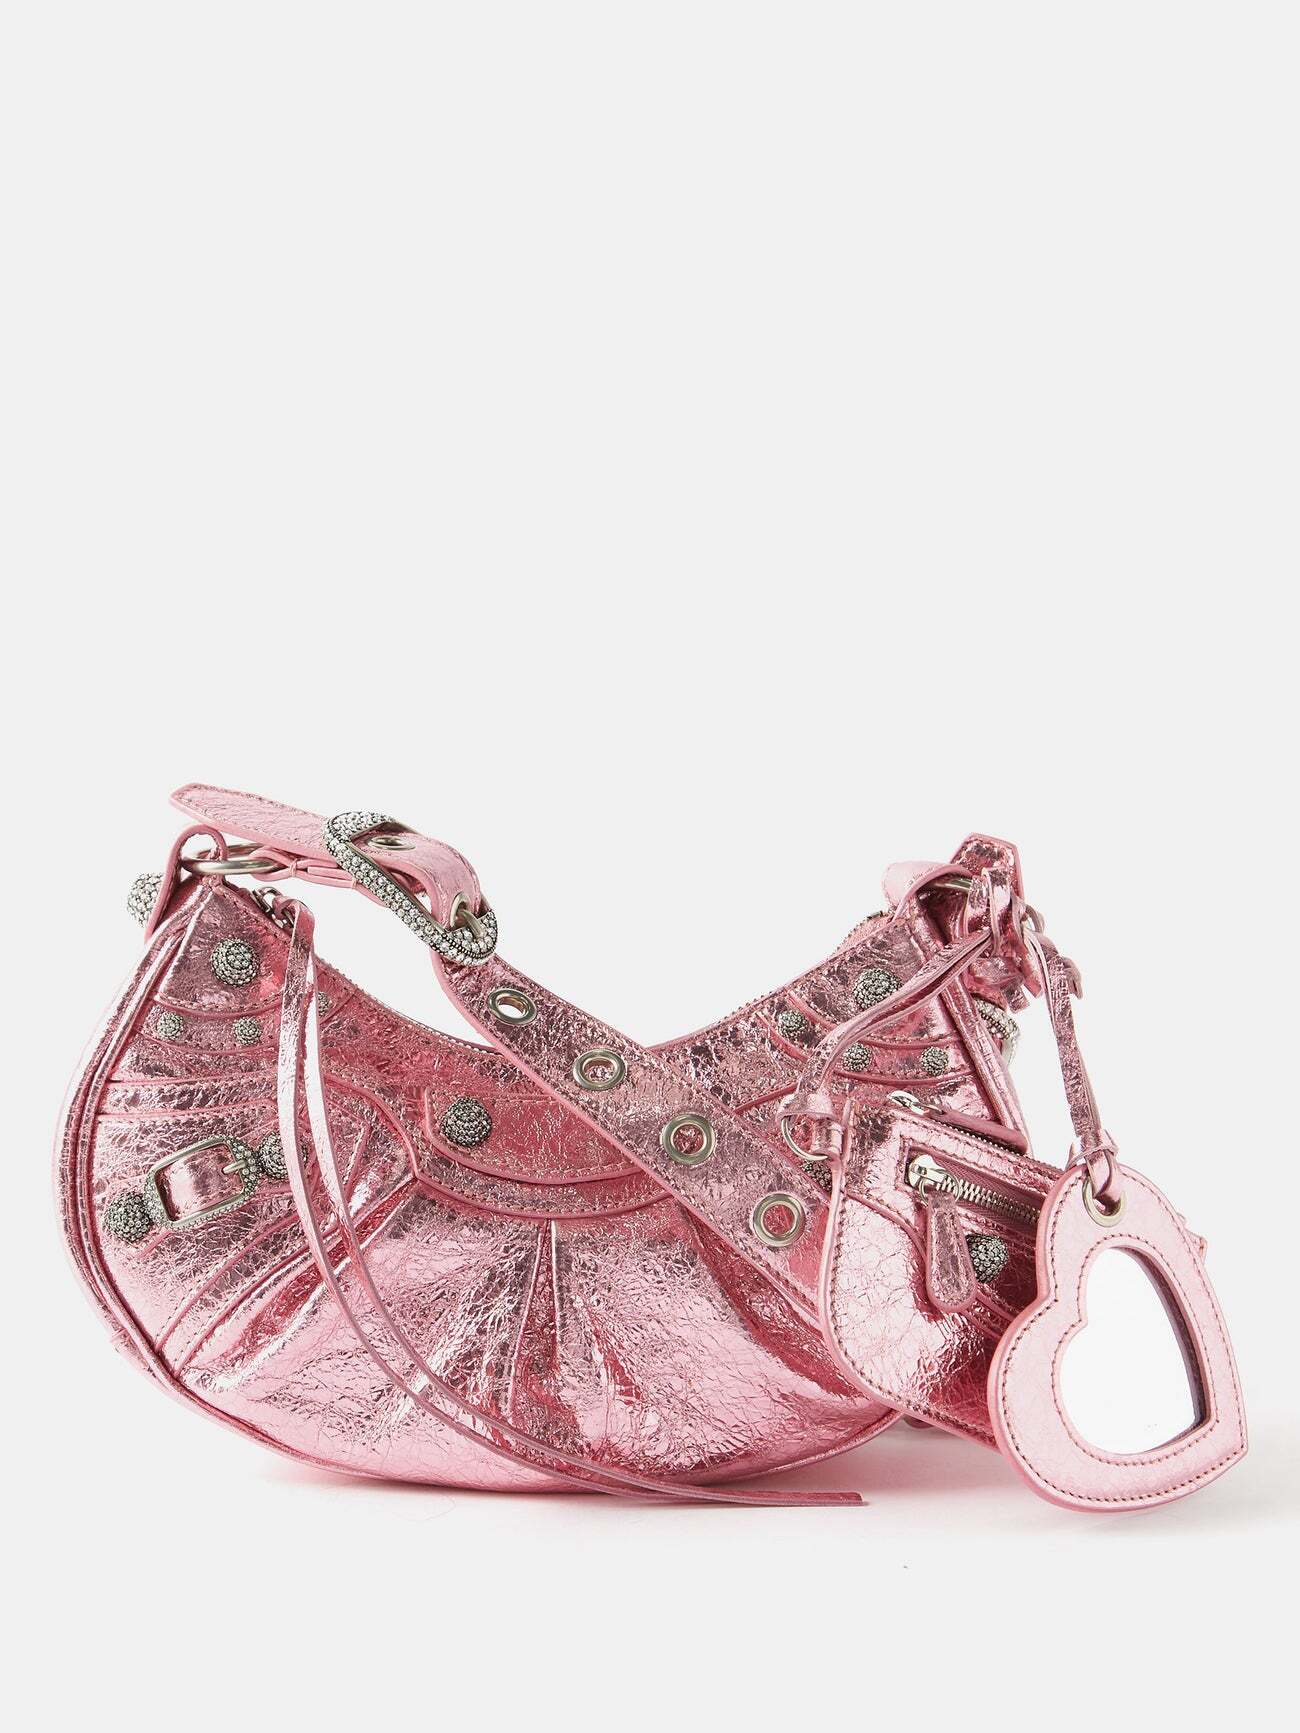 Balenciaga - Le Cagole Xs Studded Leather Shoulder Bag - Womens - Pink